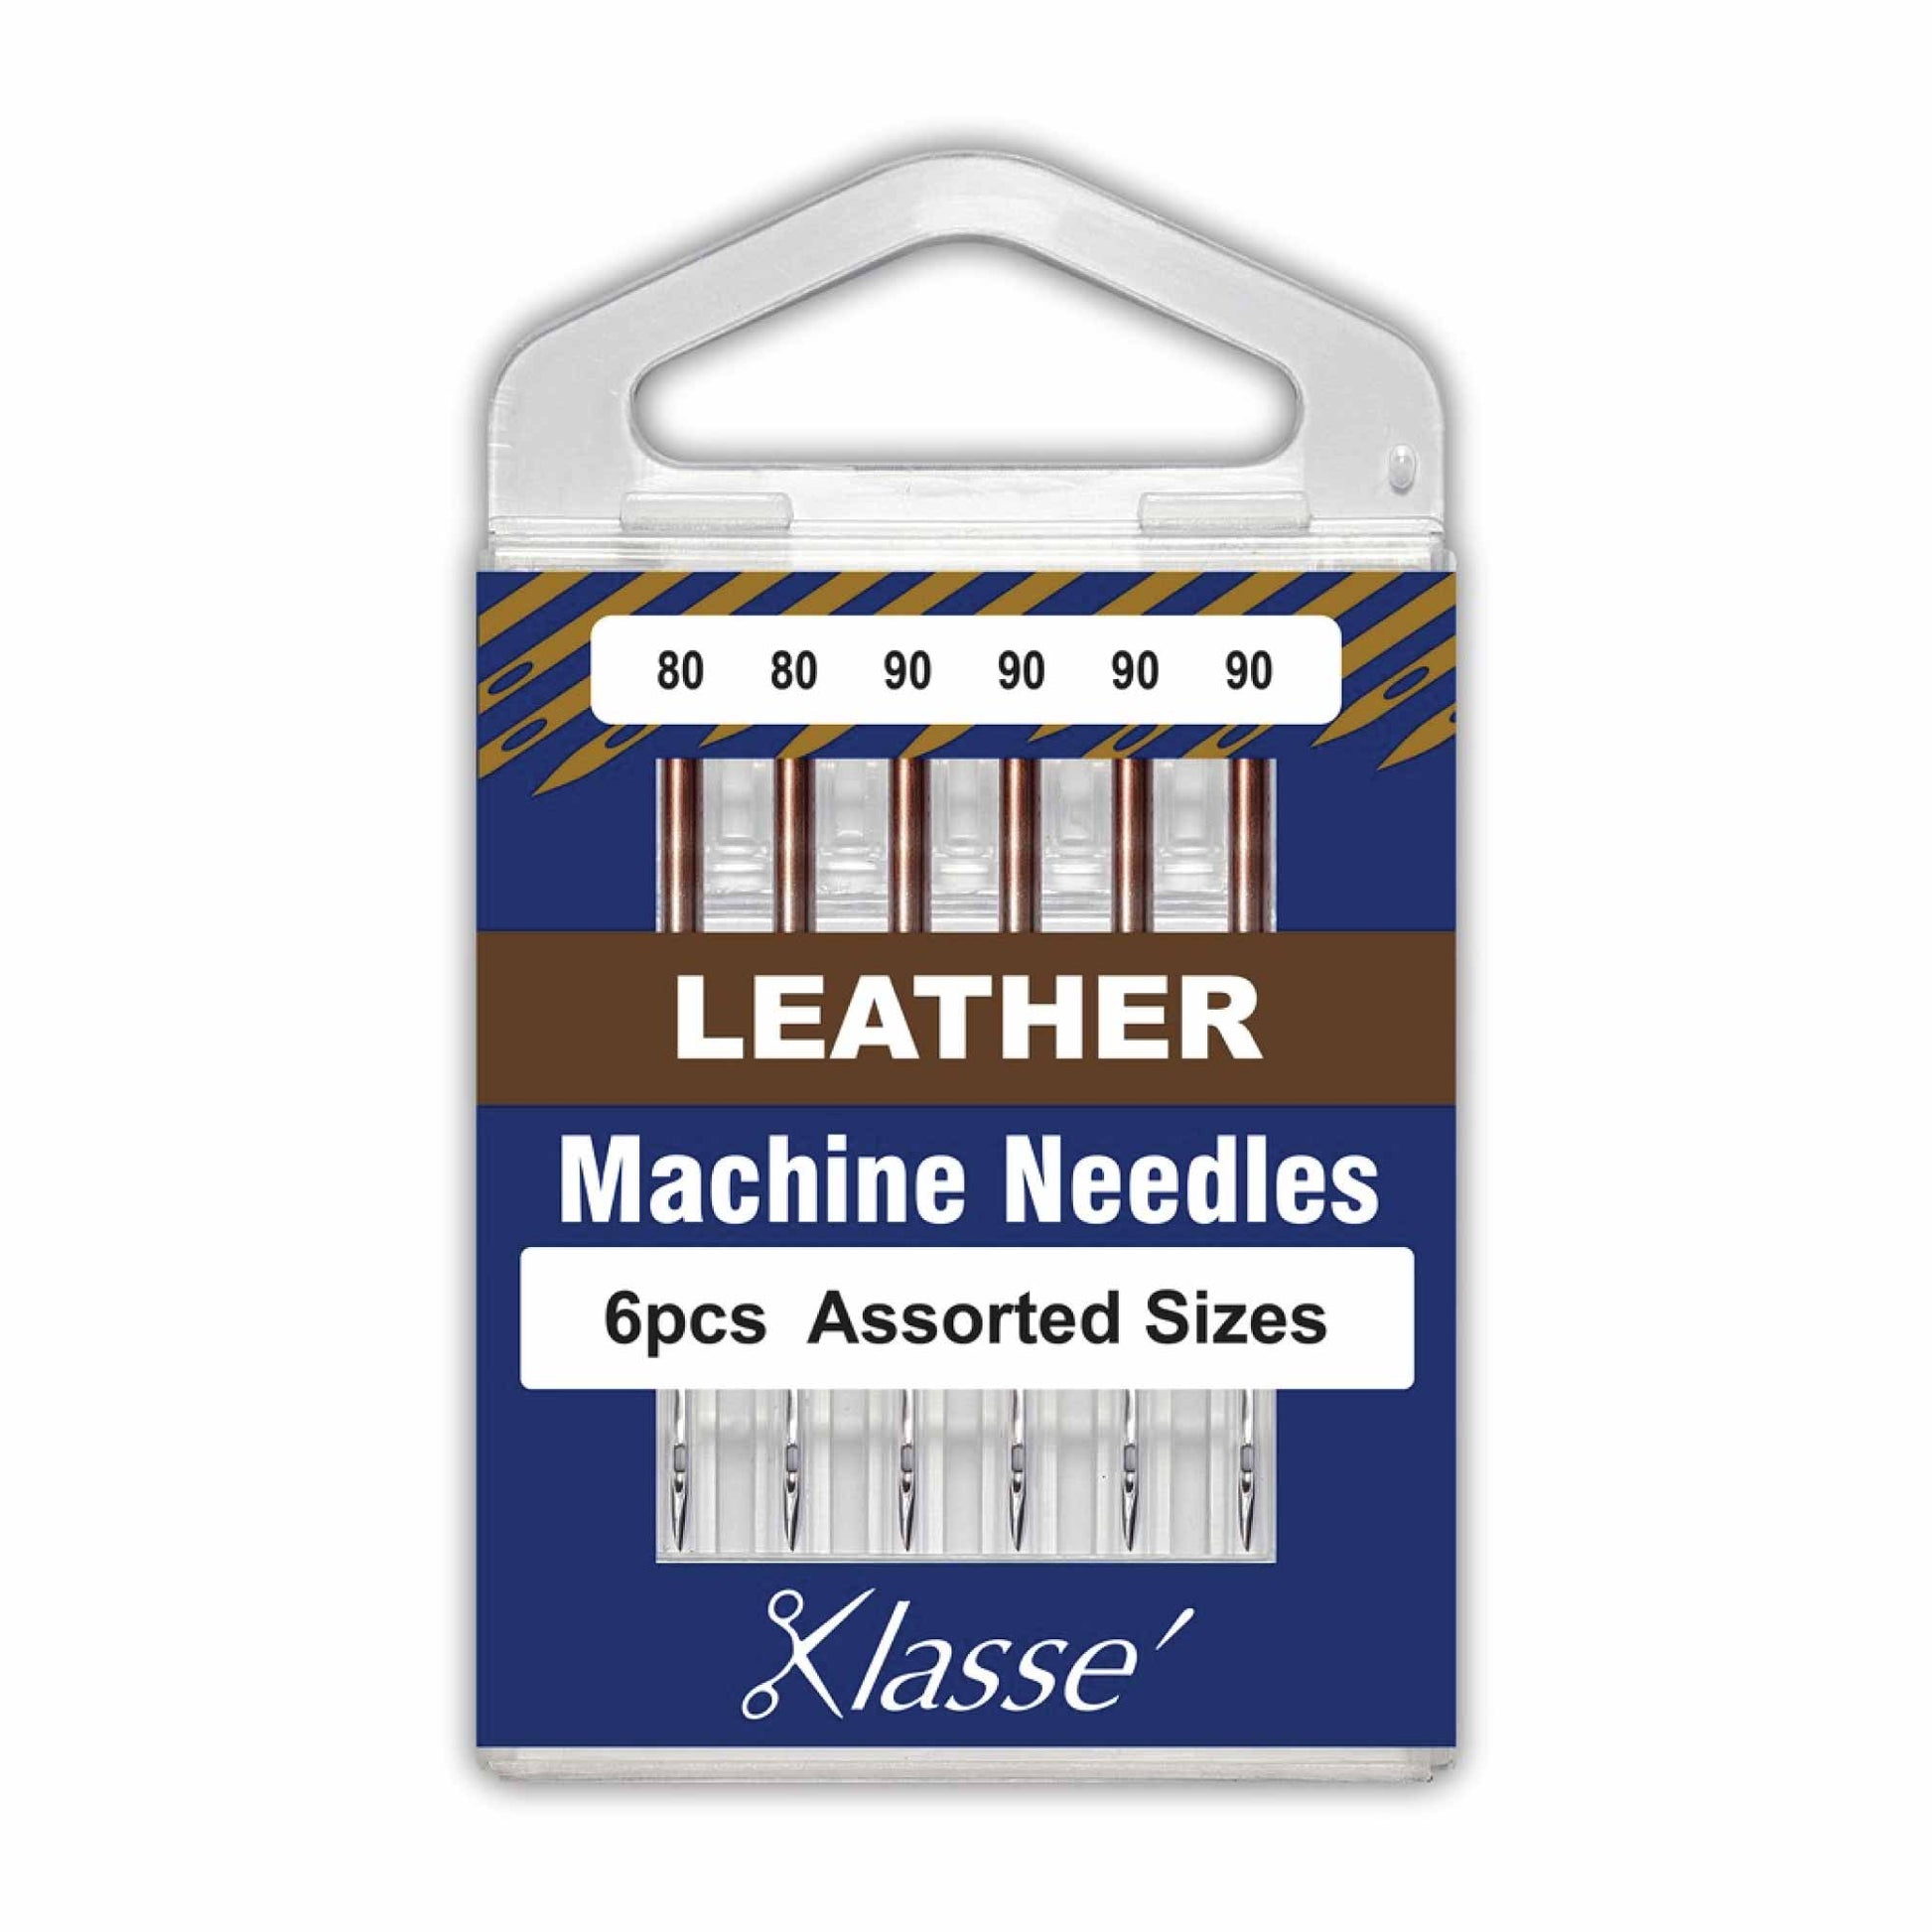 Klasse 80/90 Leather Sewing Machine Needles Assorted Sizes 6 Pack Chisel Point